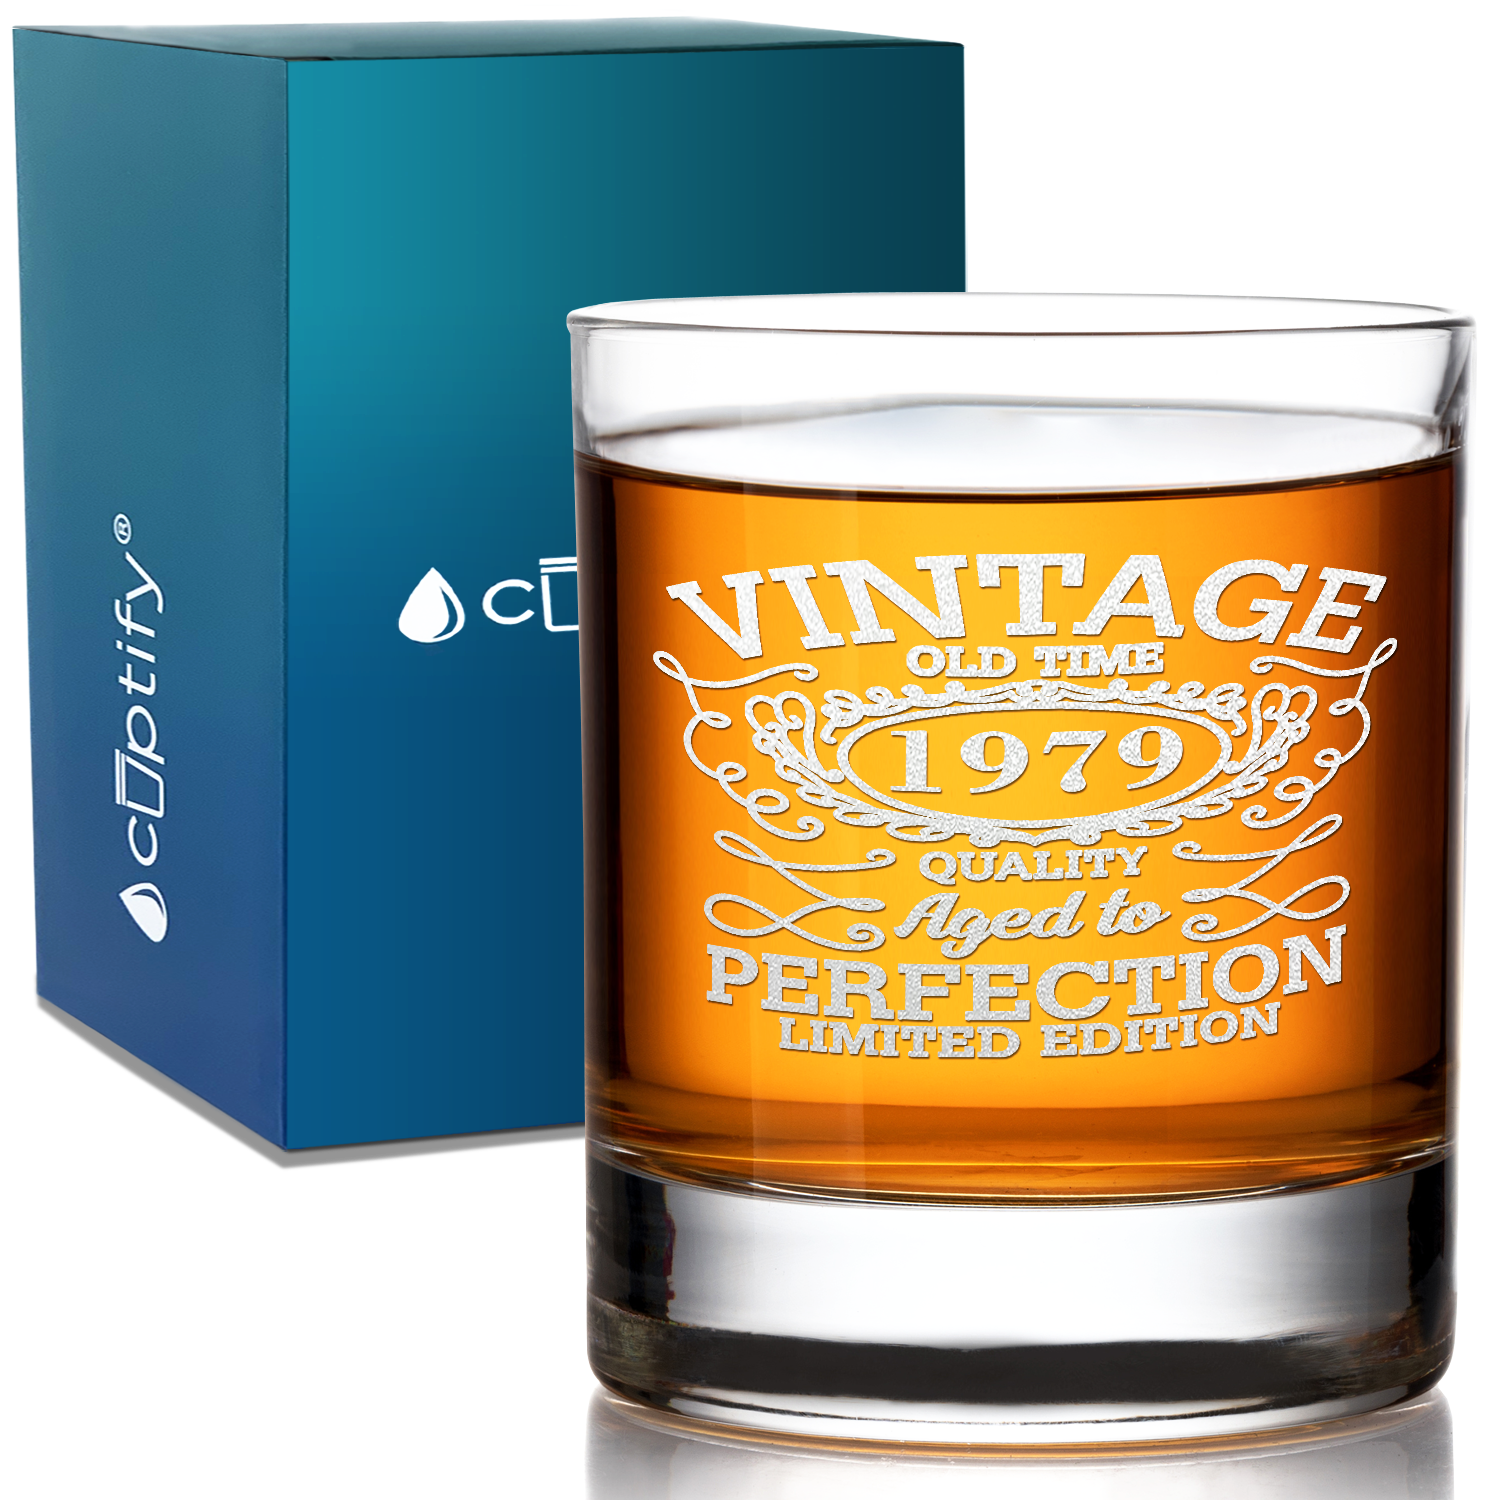 42nd Birthday Vintage 42 Years Old Time 1979 Quality Laser Engraved 10.25oz Old Fashion Glass